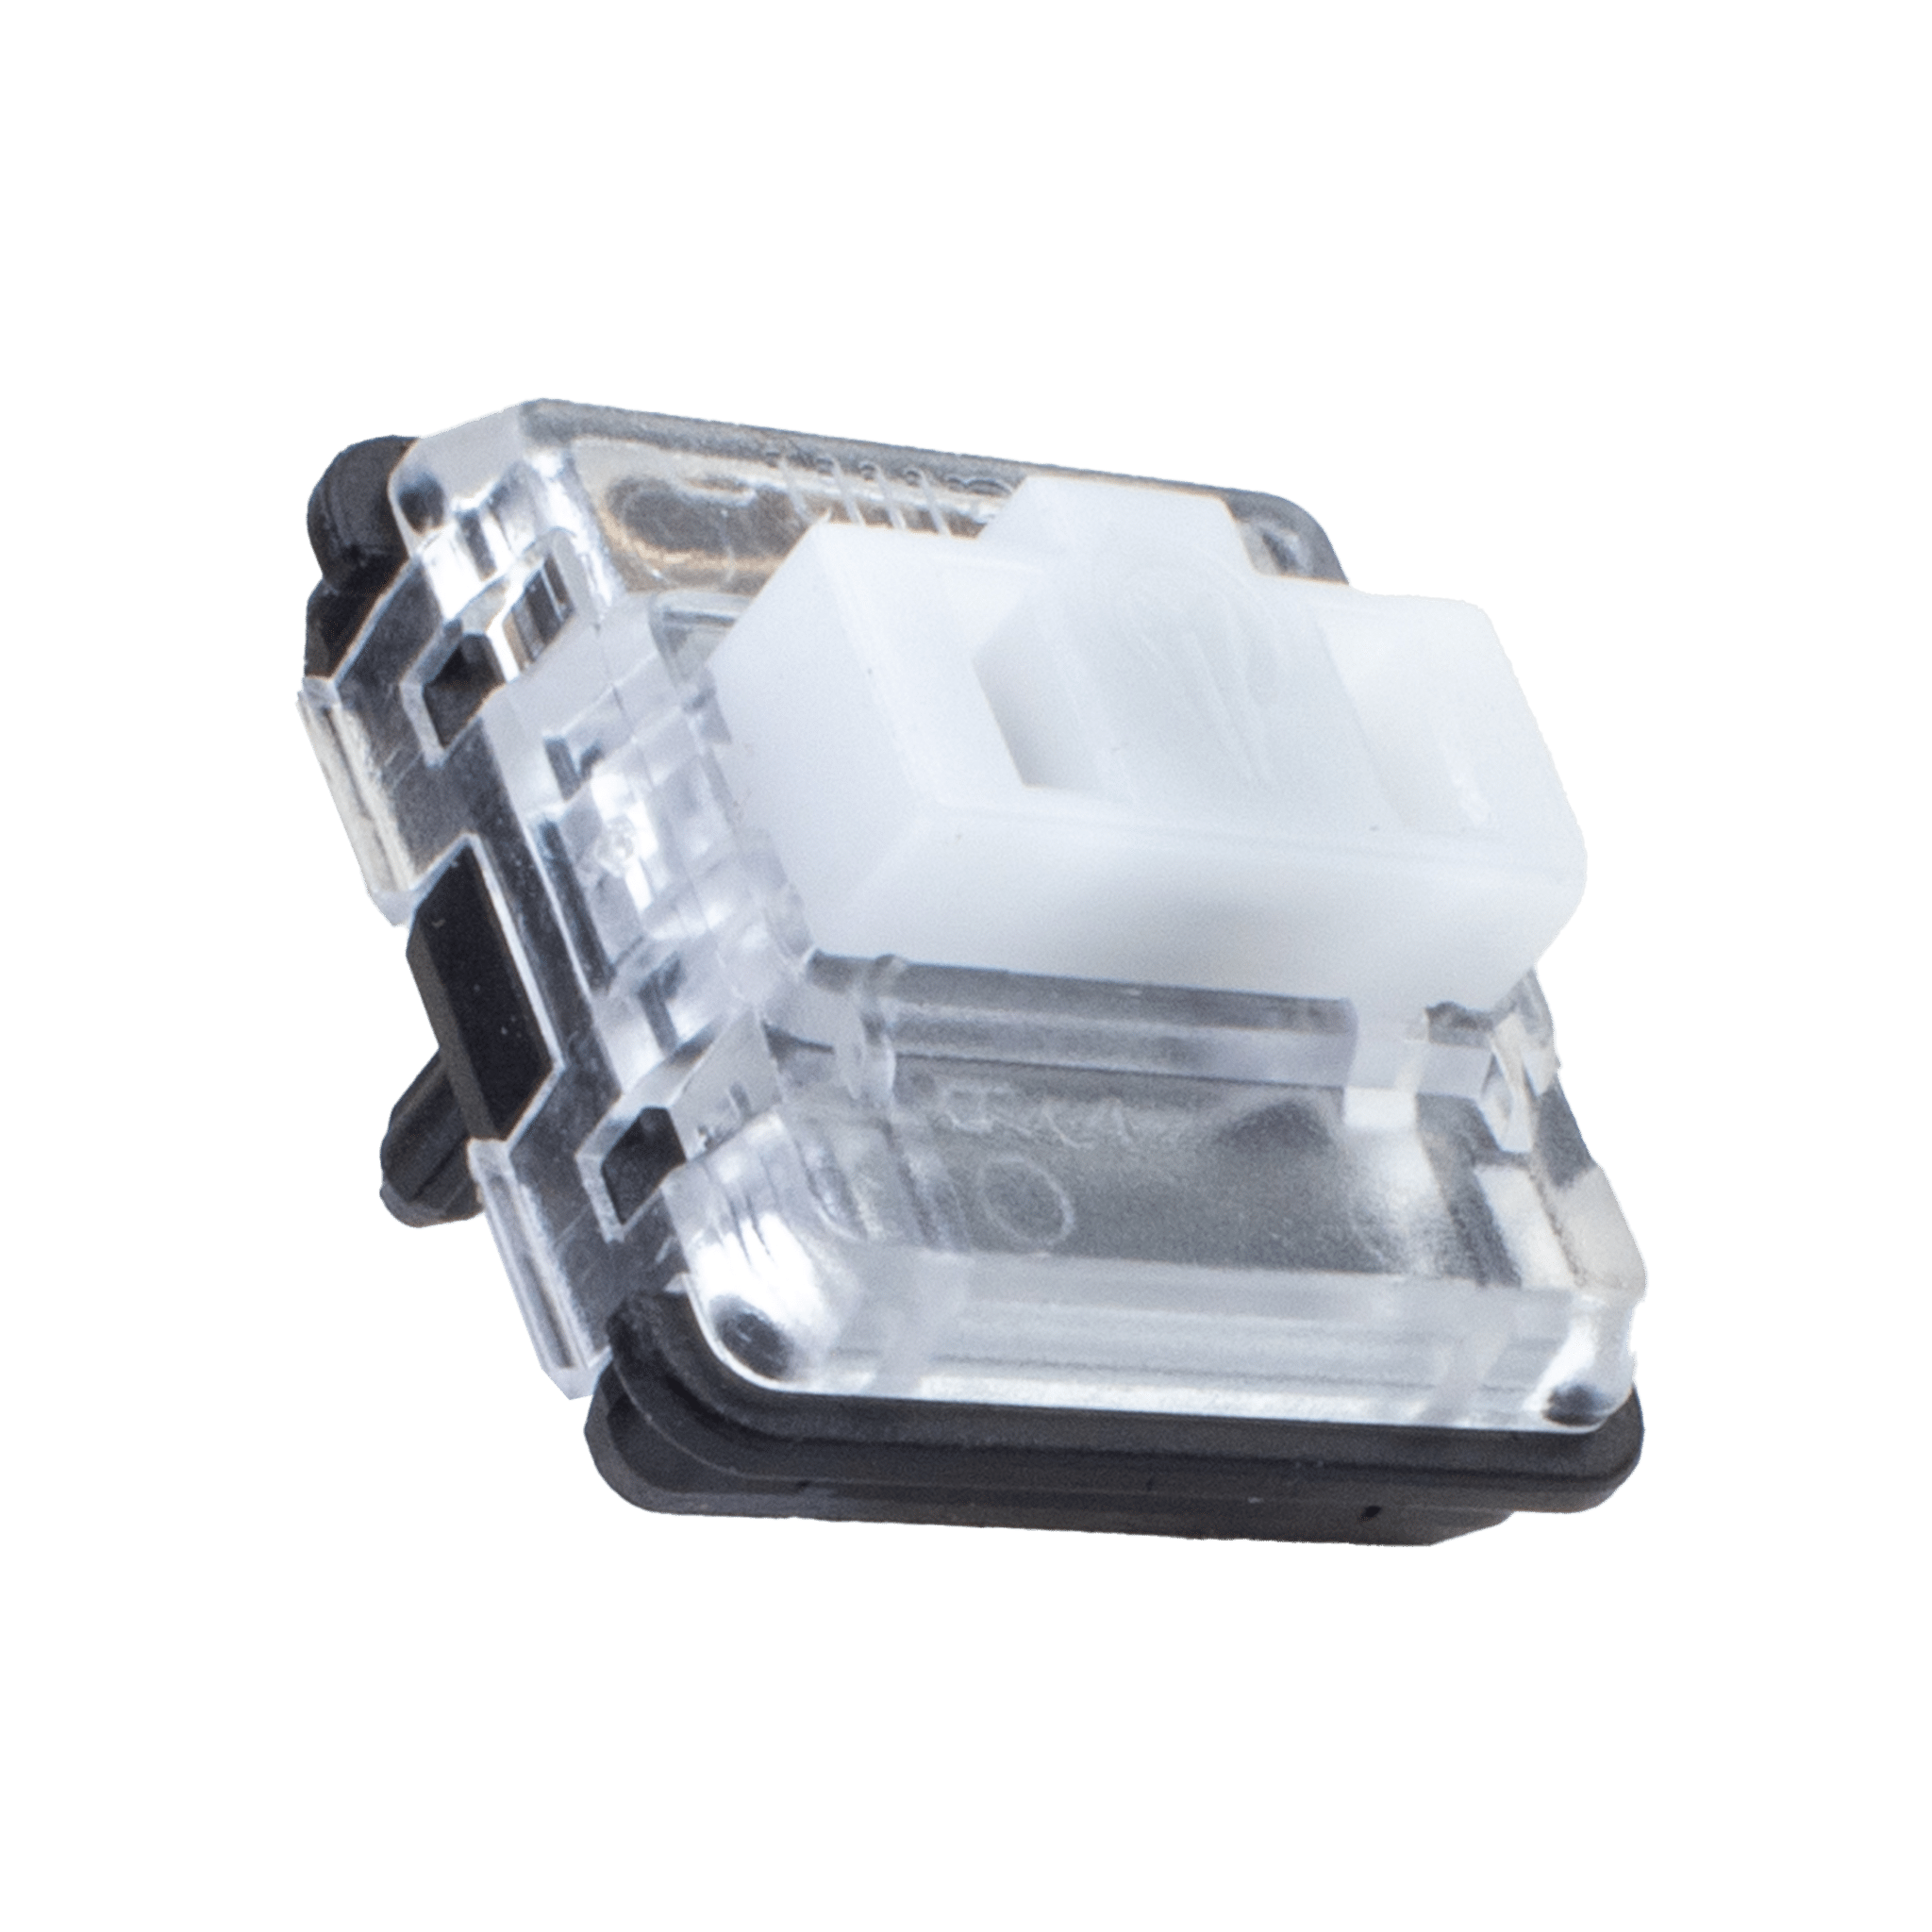 Kailh Low Profile Choc Switches (V1) - White - Mechboards